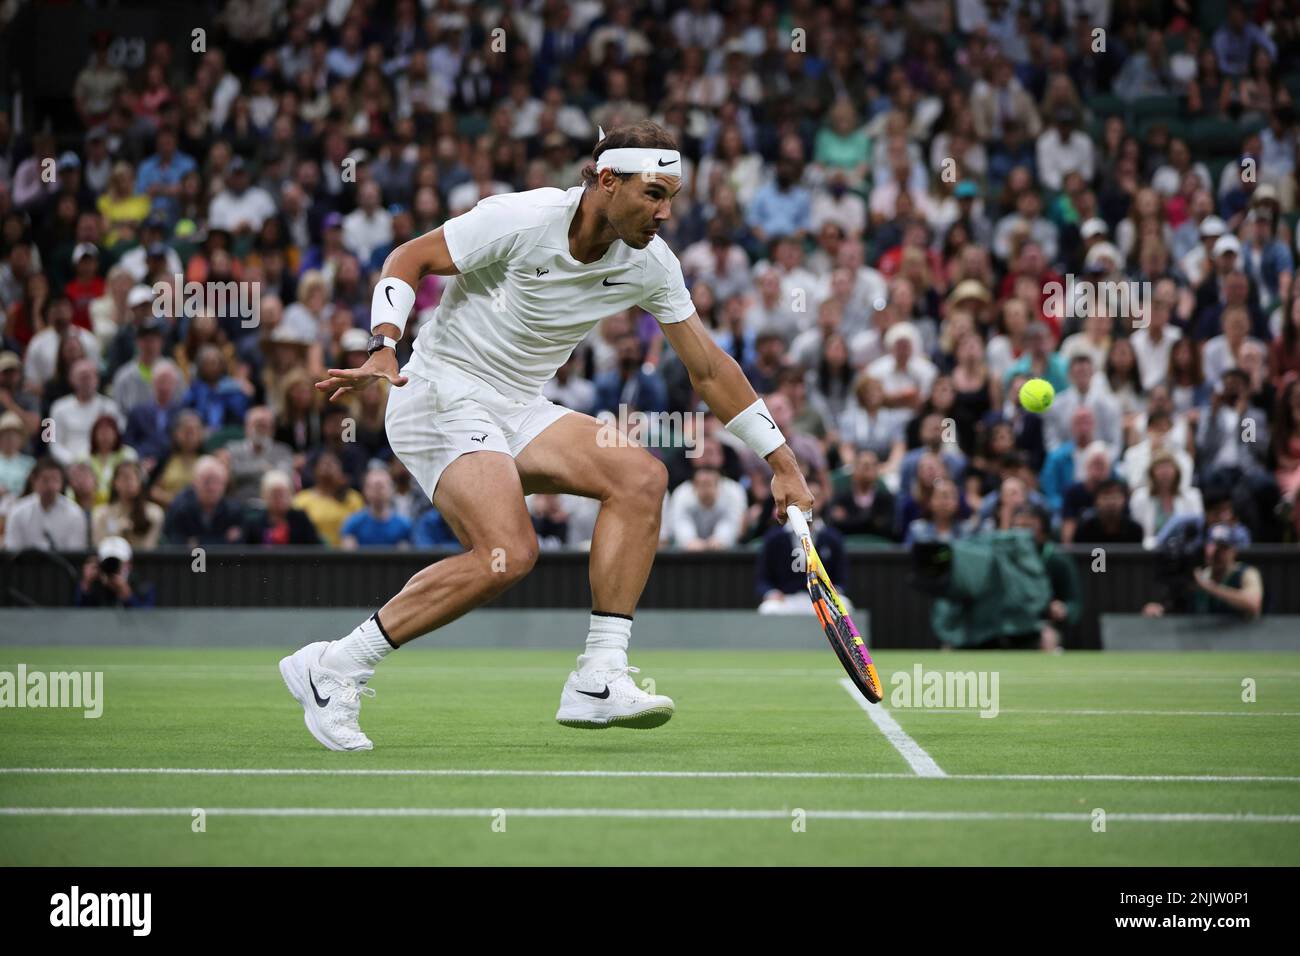 Rafael Nadal of Spain hits a return to Lorenzo Sonego of Italy during the game of the gentlemens singles third-round match in the Championships, Wimbledon at All England Lawn Tennis and Croquet